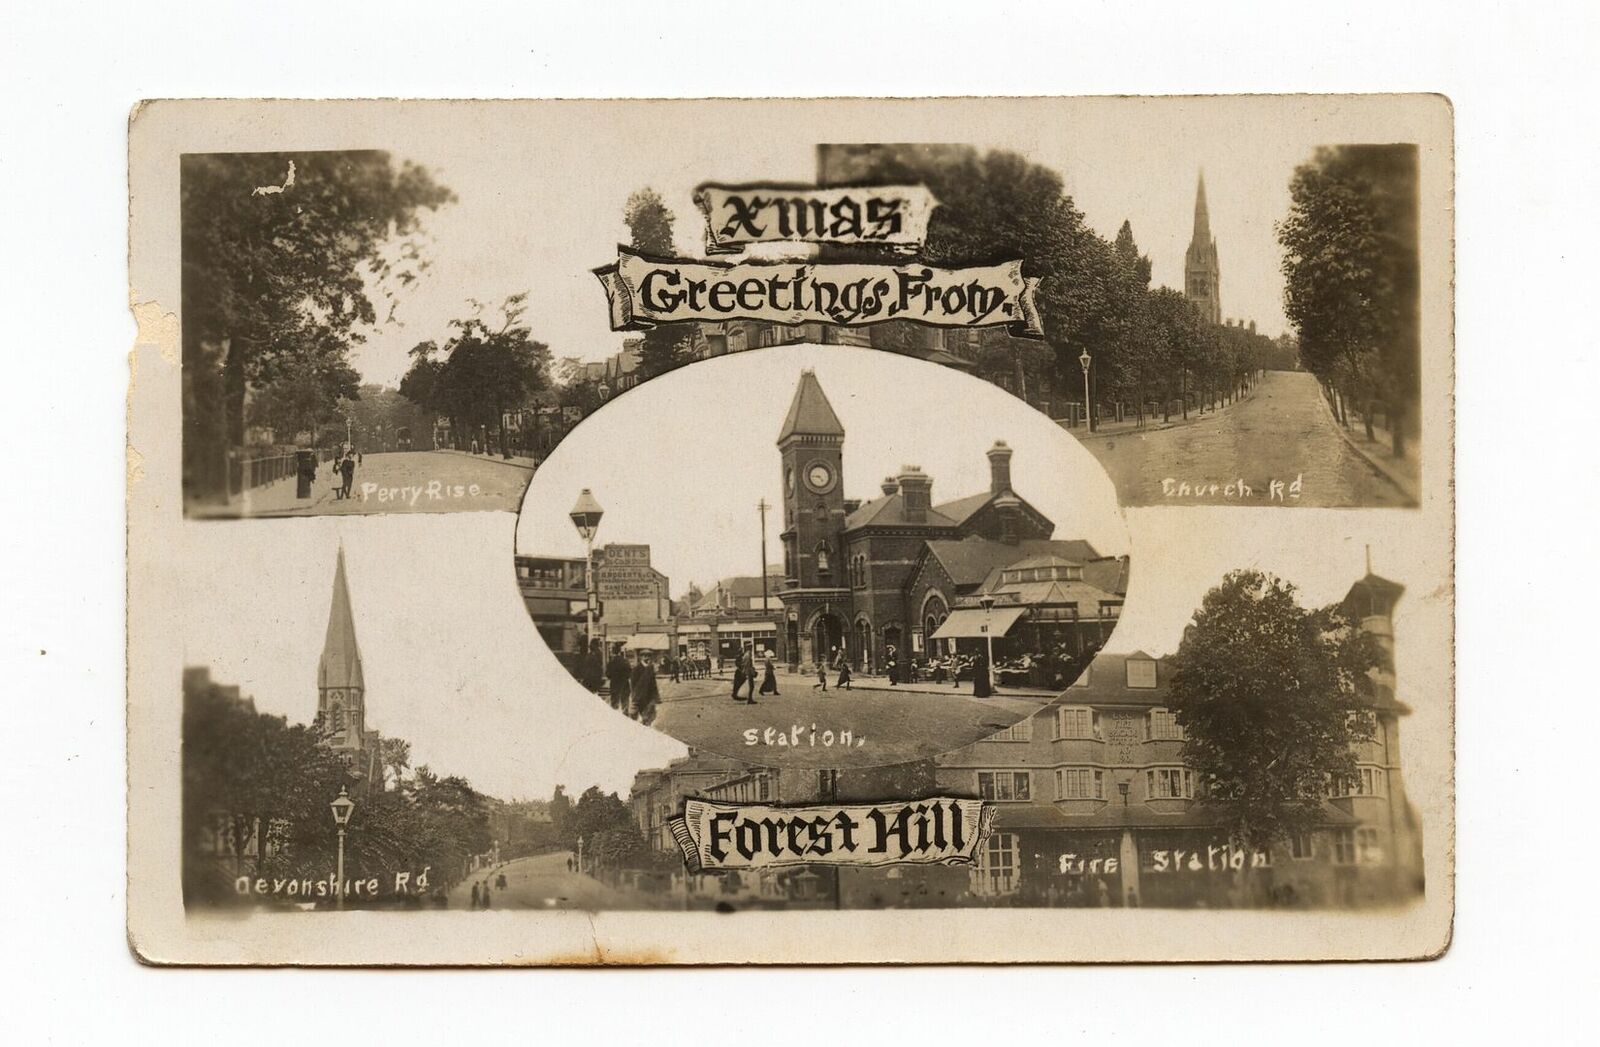 XMAS GREETINGS FROM real photo postcard FOREST HILL ENGLAND c1920s rppc